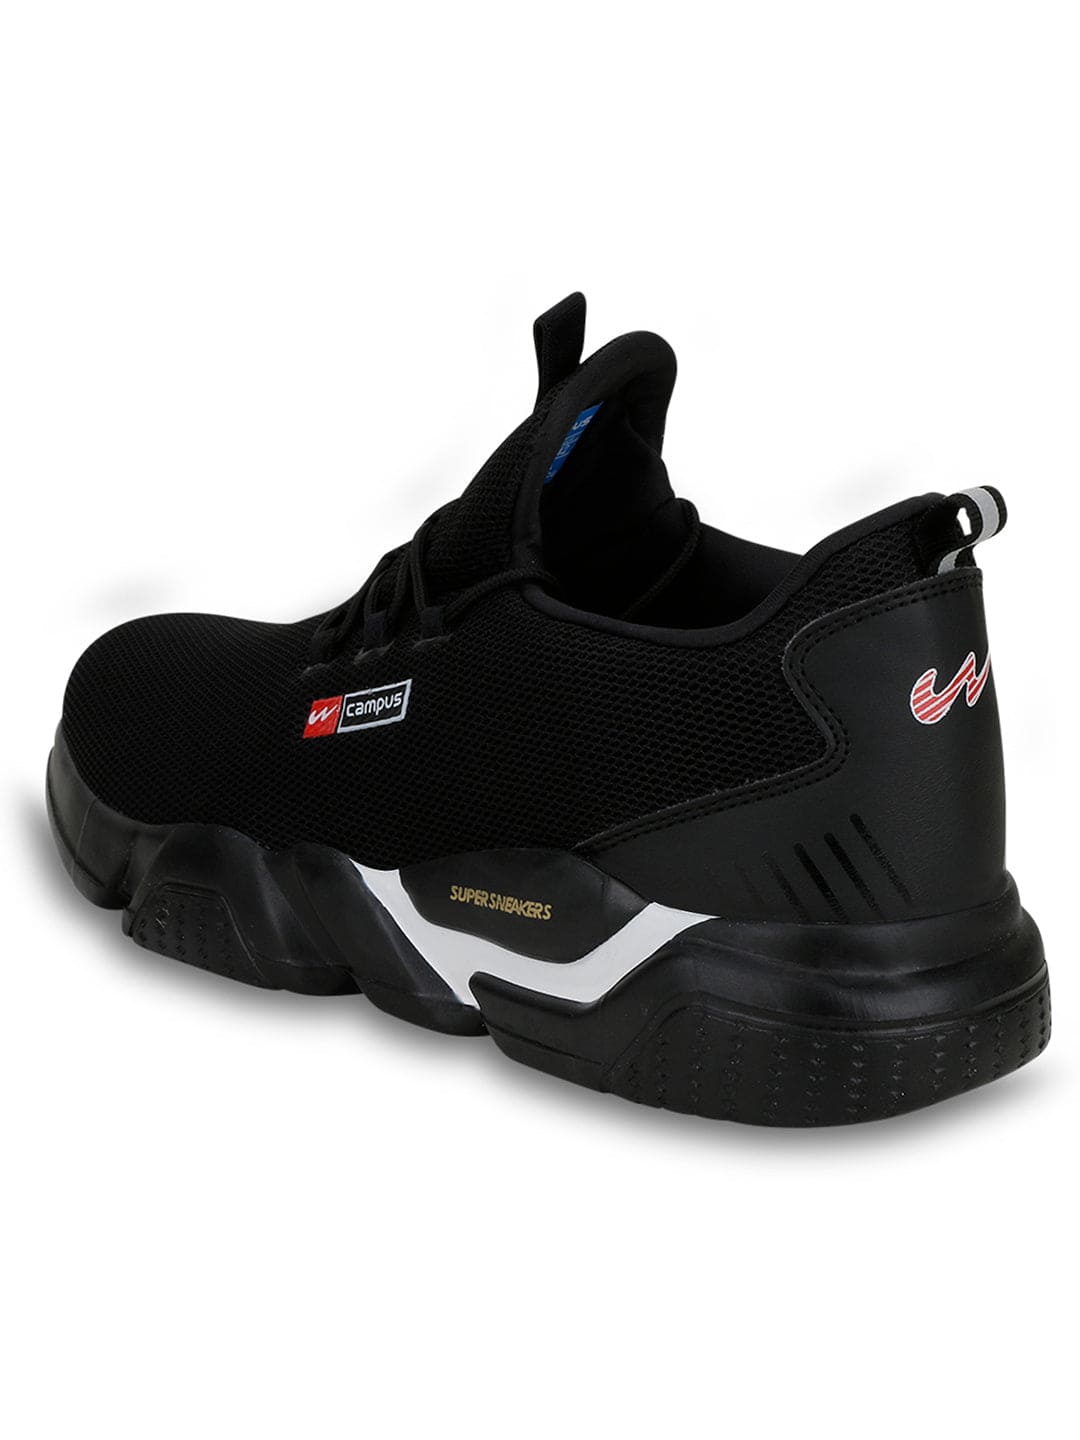 CAMPUS COUNTY Running Shoes For Men - Buy CAMPUS COUNTY Running Shoes For  Men Online at Best Price - Shop Online for Footwears in India | Flipkart.com